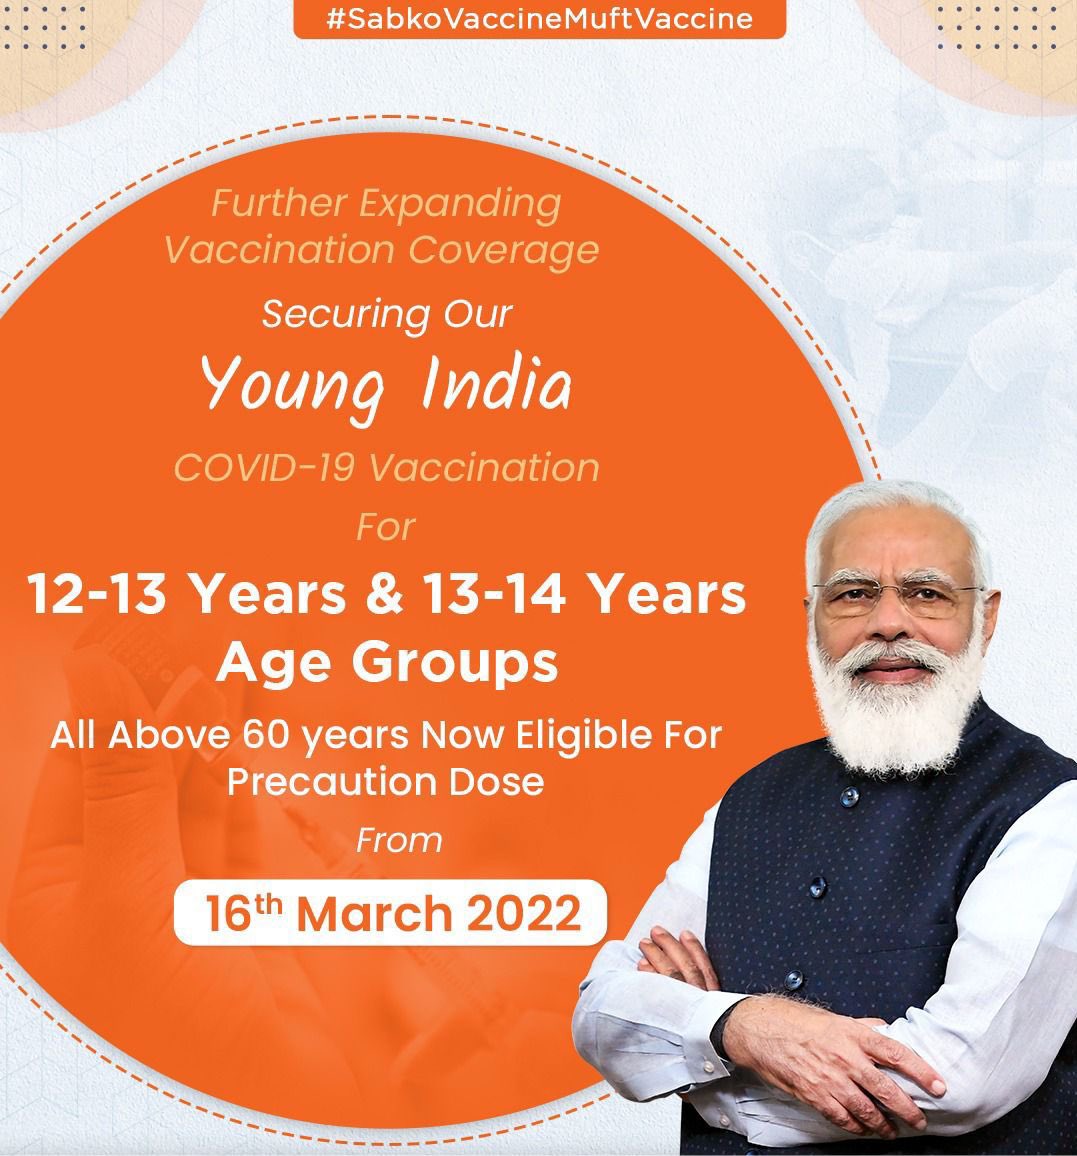 Under Guidelines of PM @narendramodi Ji Govt on #LargestVaccineDrive childrens of 12-14 yrs #COVID19vaccination all over #IndianCitizens @BJP4India Does as it says...🙏🙏
@MoHFW_INDIA 
@COVIDNewsByMIB @kishanreddybjp
#IndiaFightsCorona